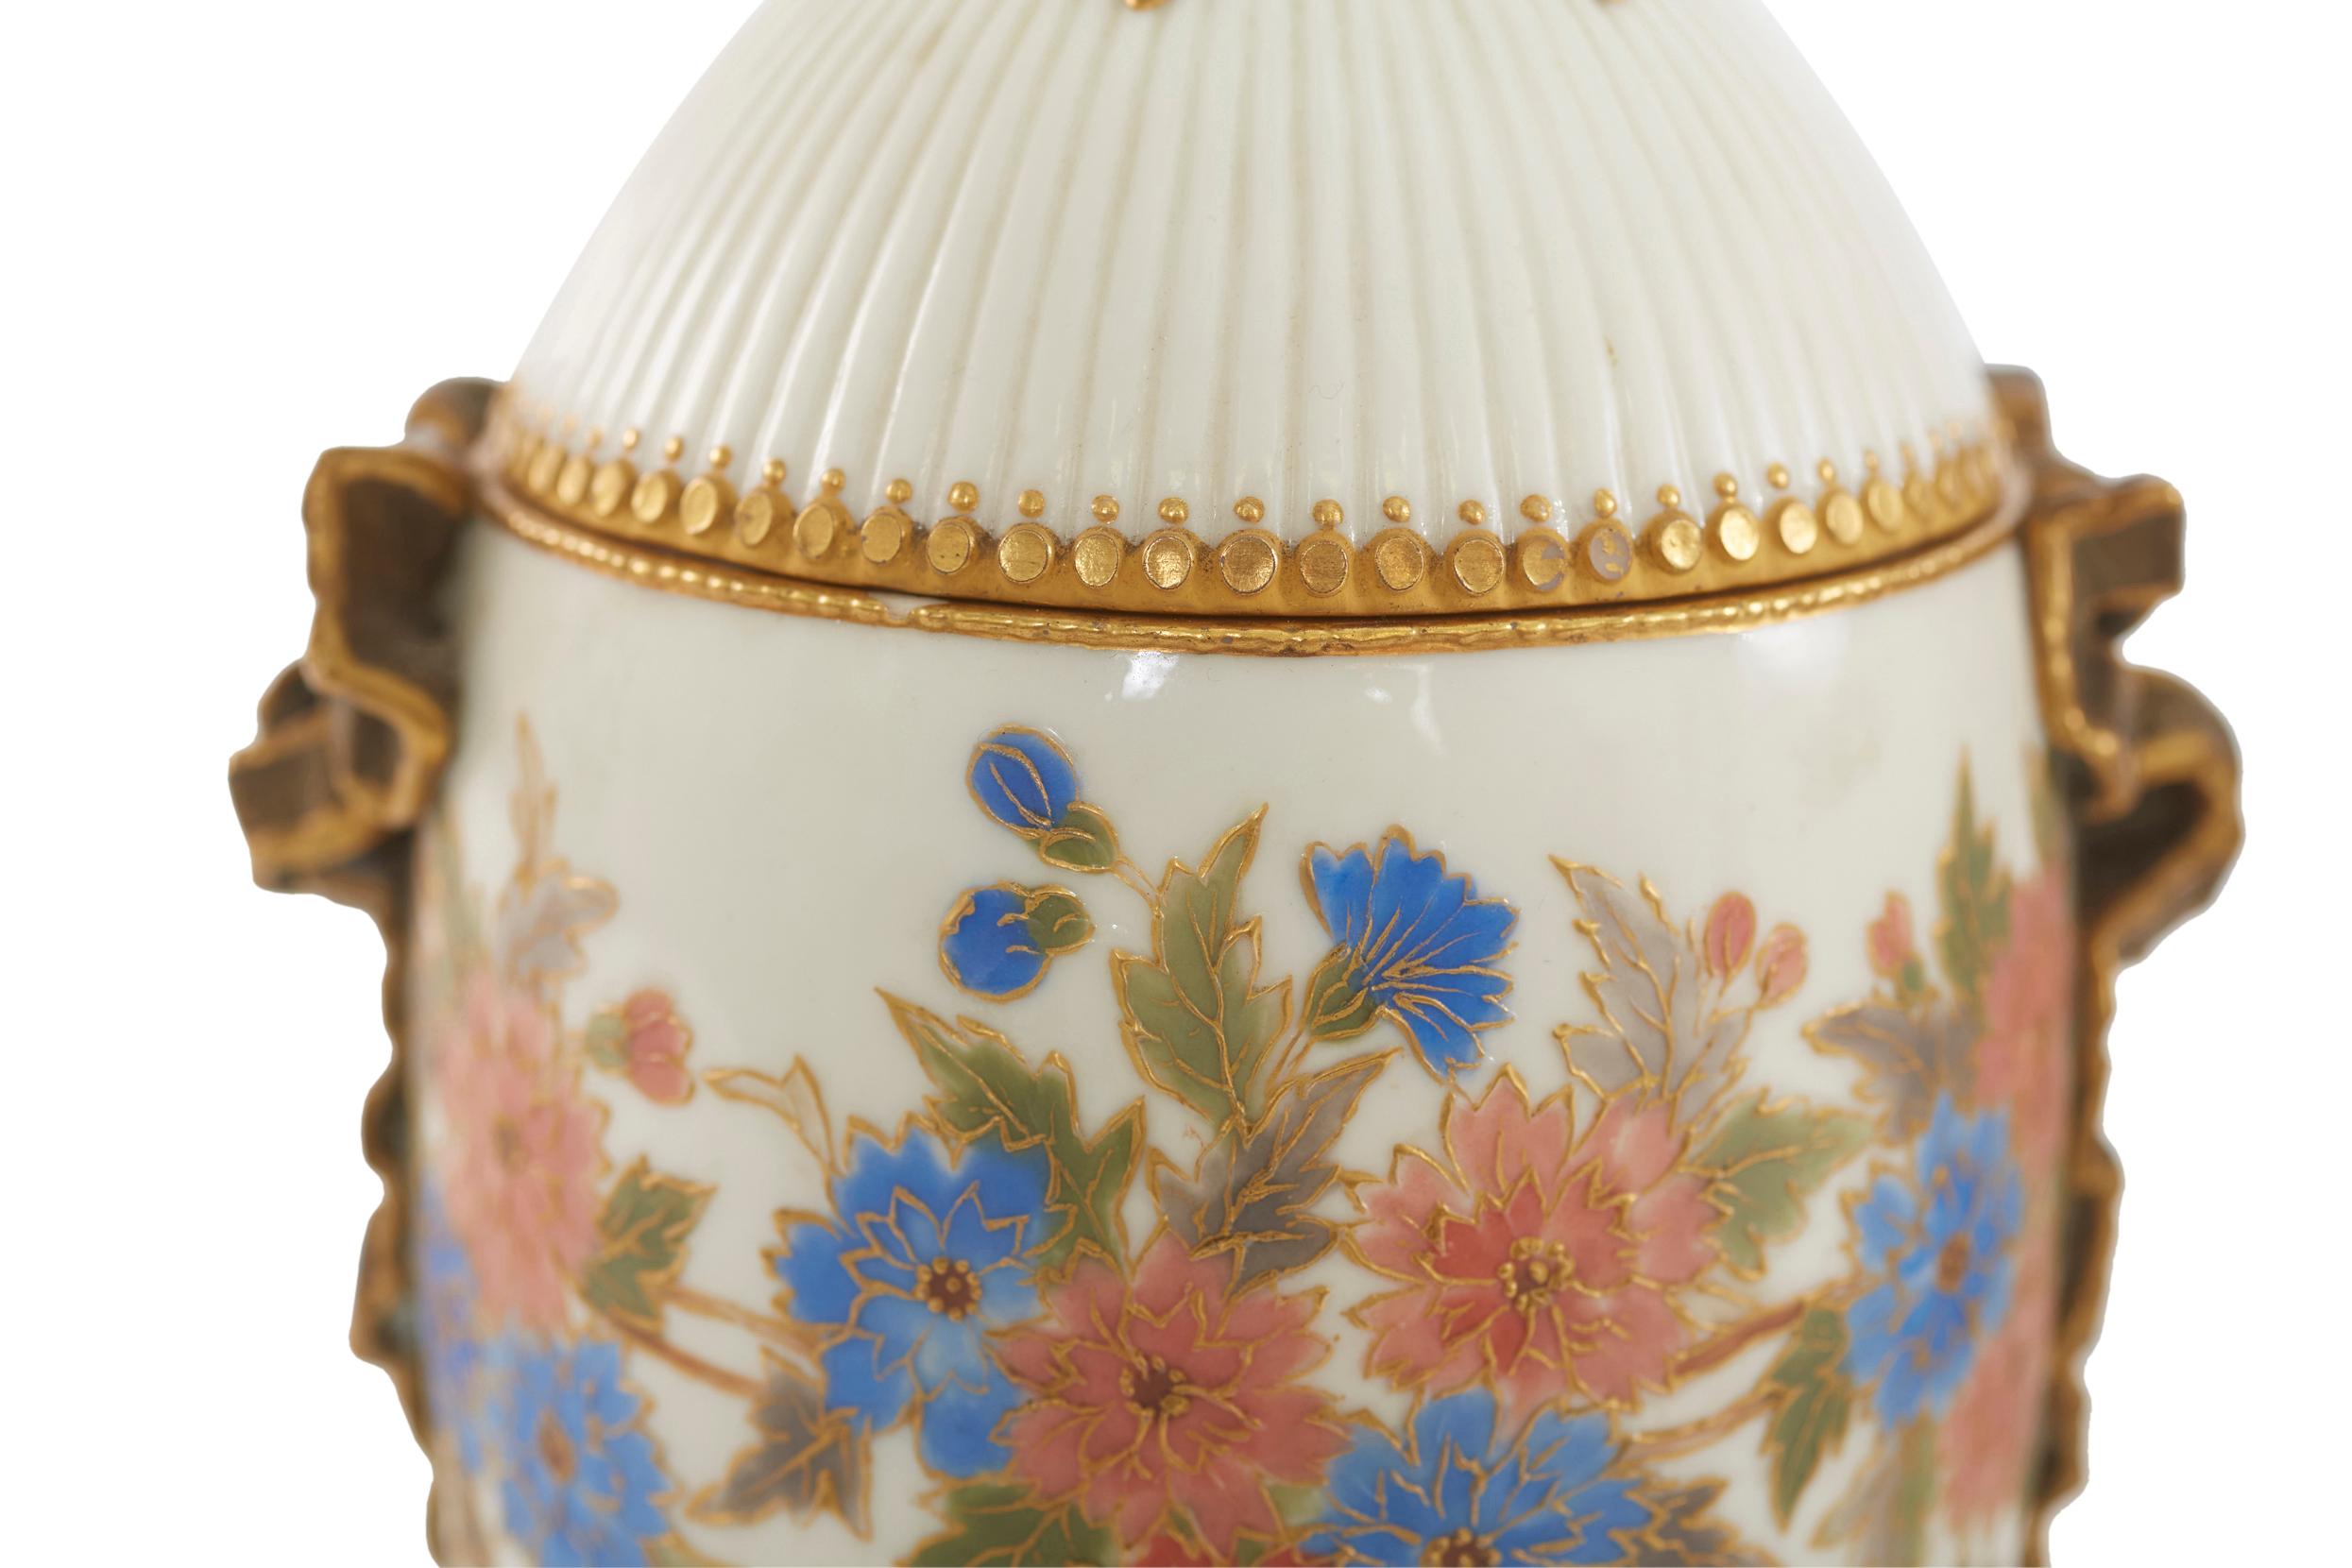 Paint Mid 19th Century Pair Covered Porcelain Urns For Sale